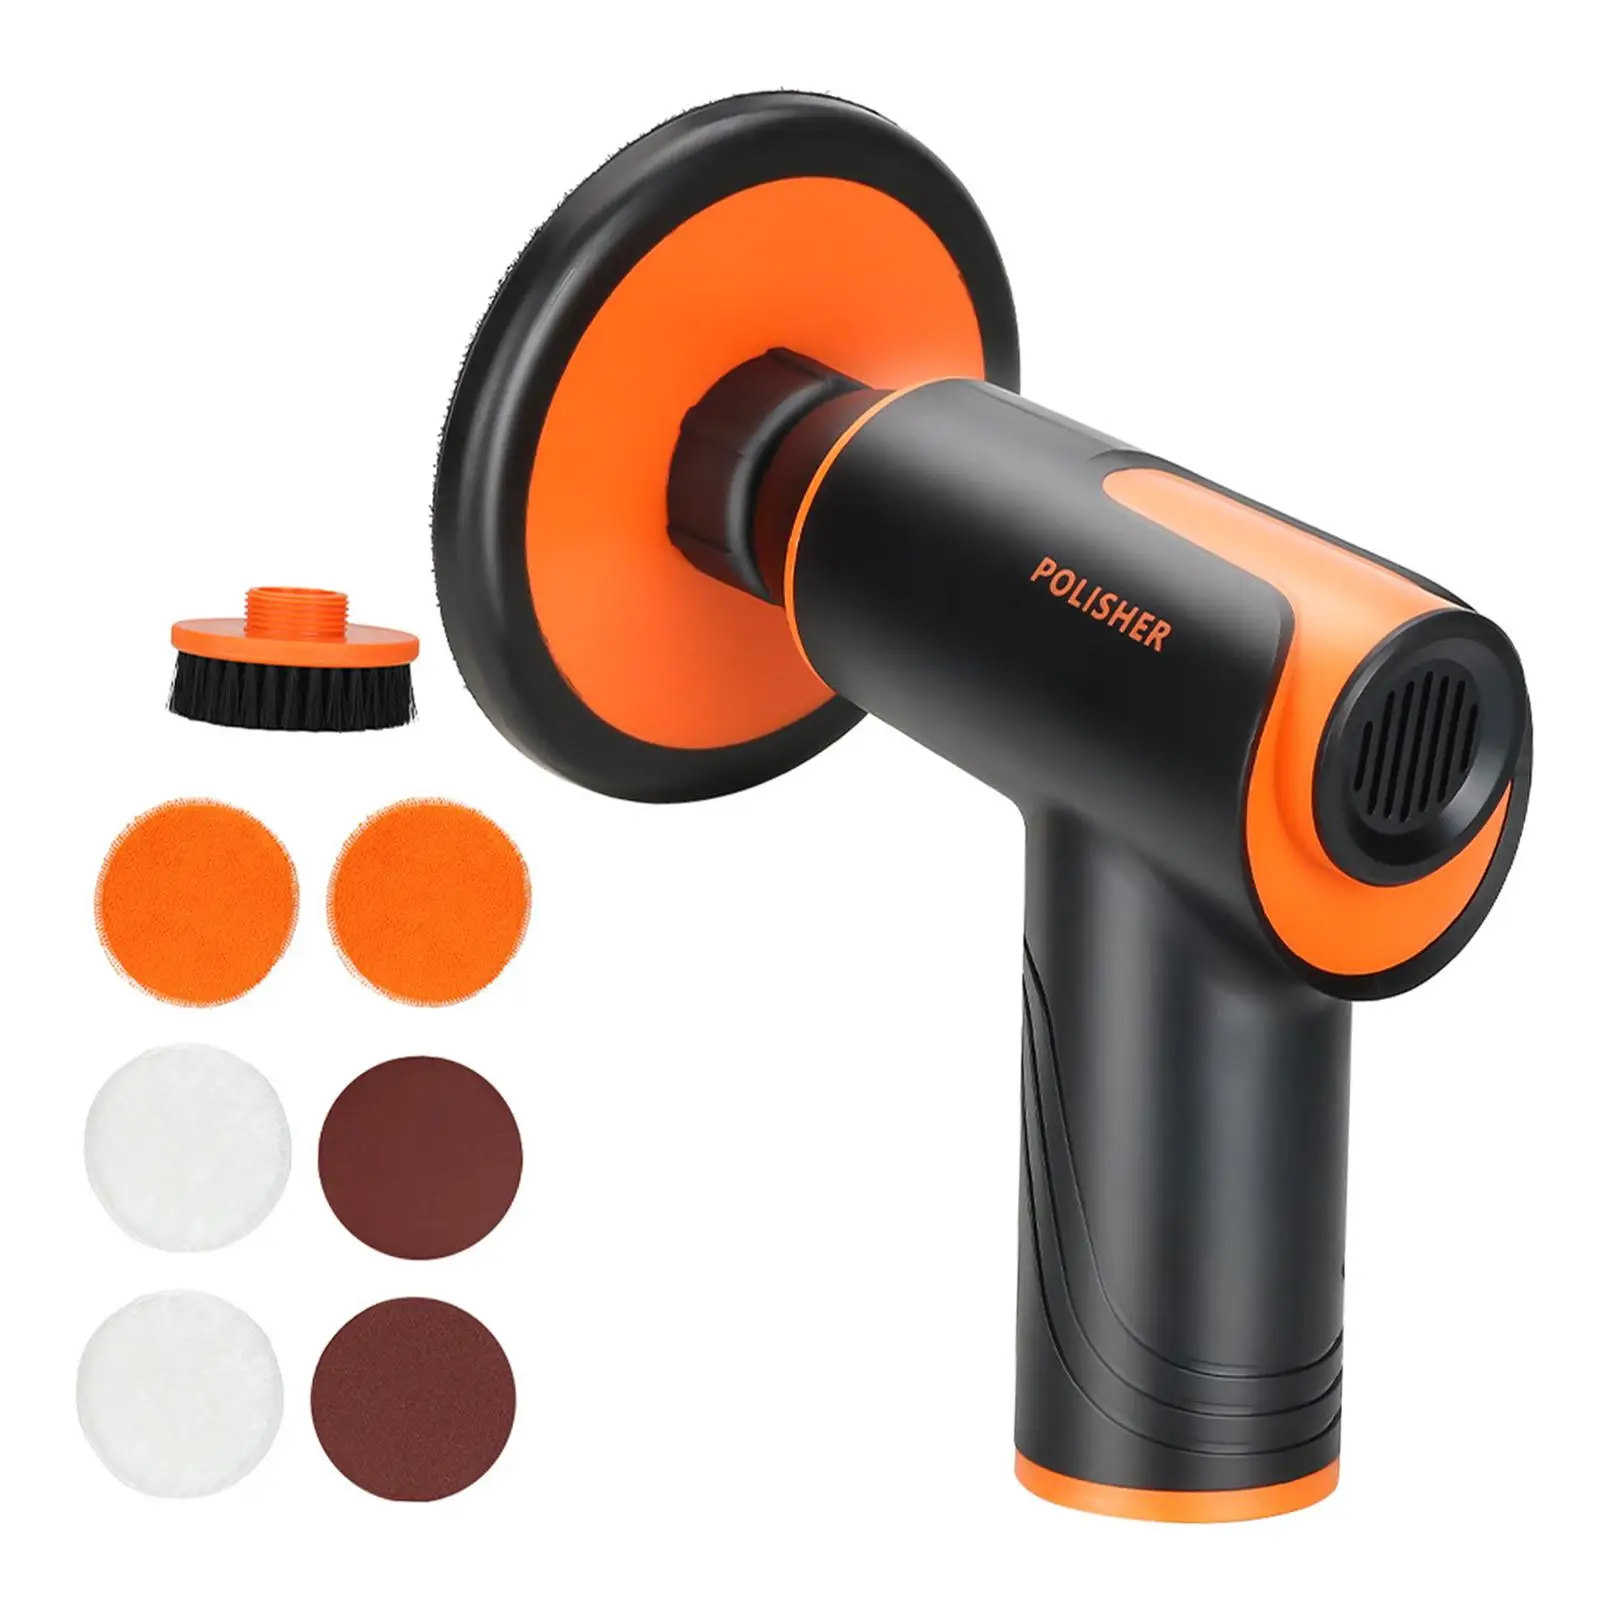 Cordless Car Buffer Polisher Rechargeable with 2x2000 MAh Battery Portable